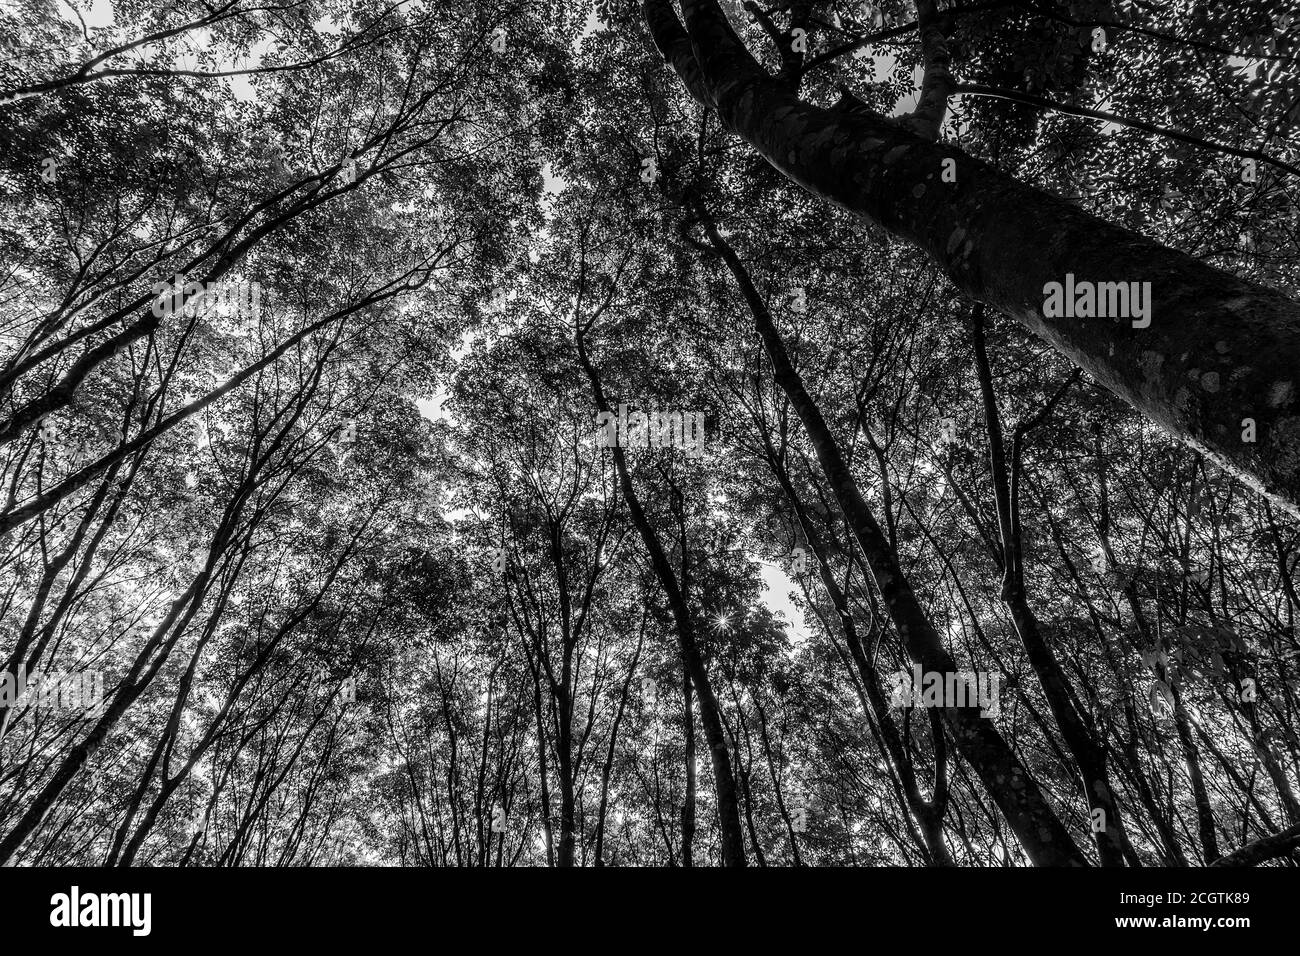 Latex rubber plantation or para rubber tree or tree rubber with leaves branch in southern Thailand, Black and white and monochrome style Stock Photo